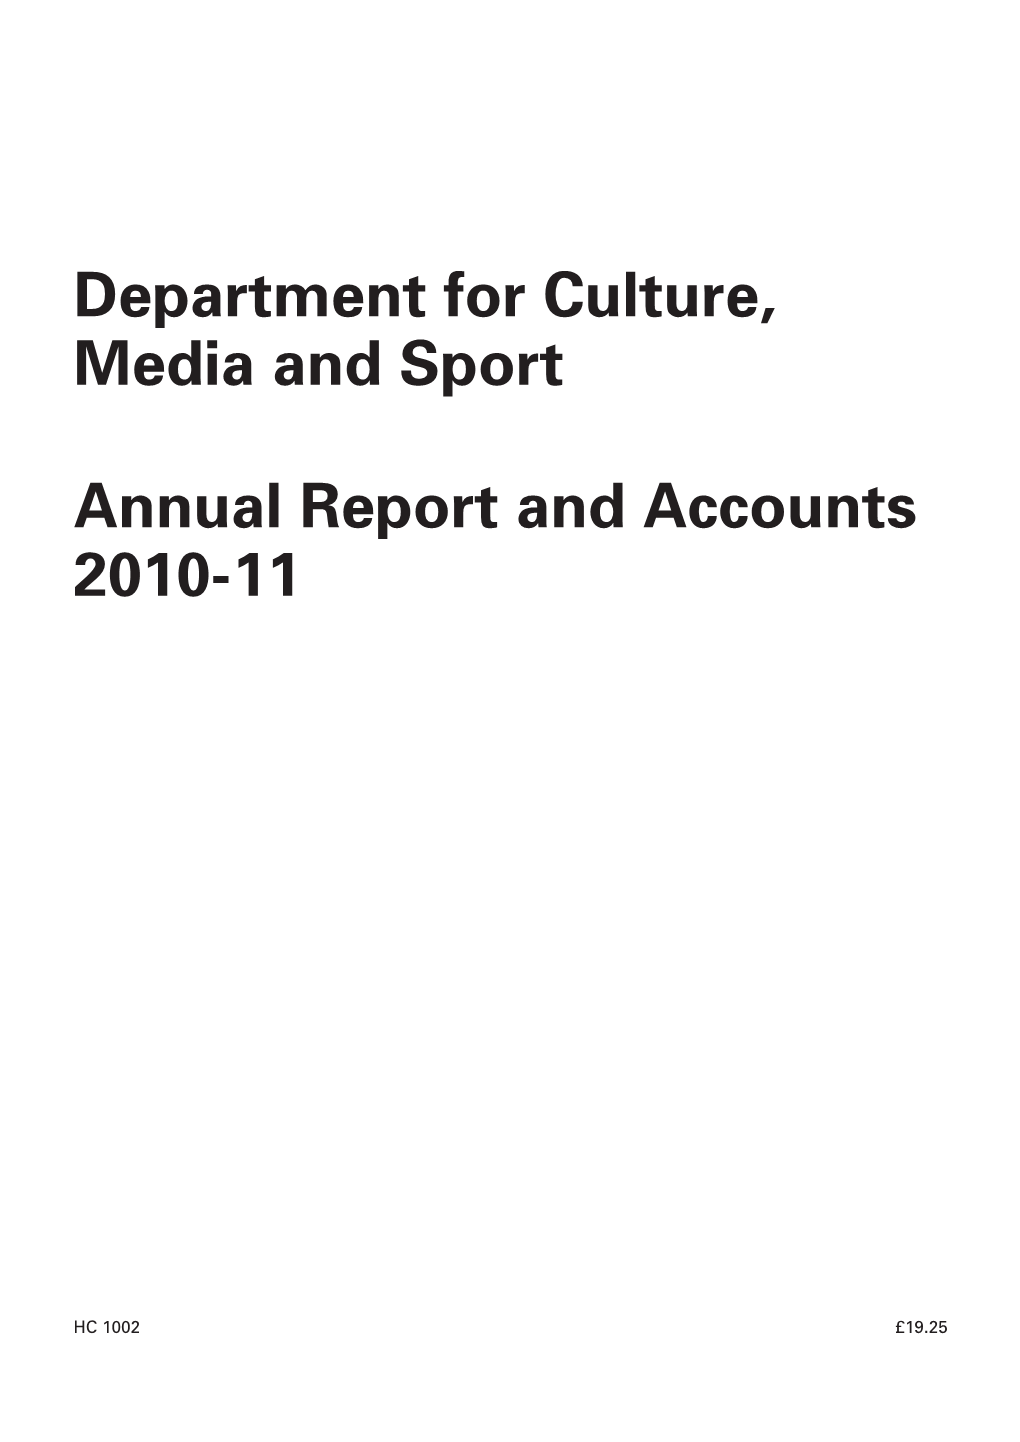 Annual Reports and Accounts 2010-11